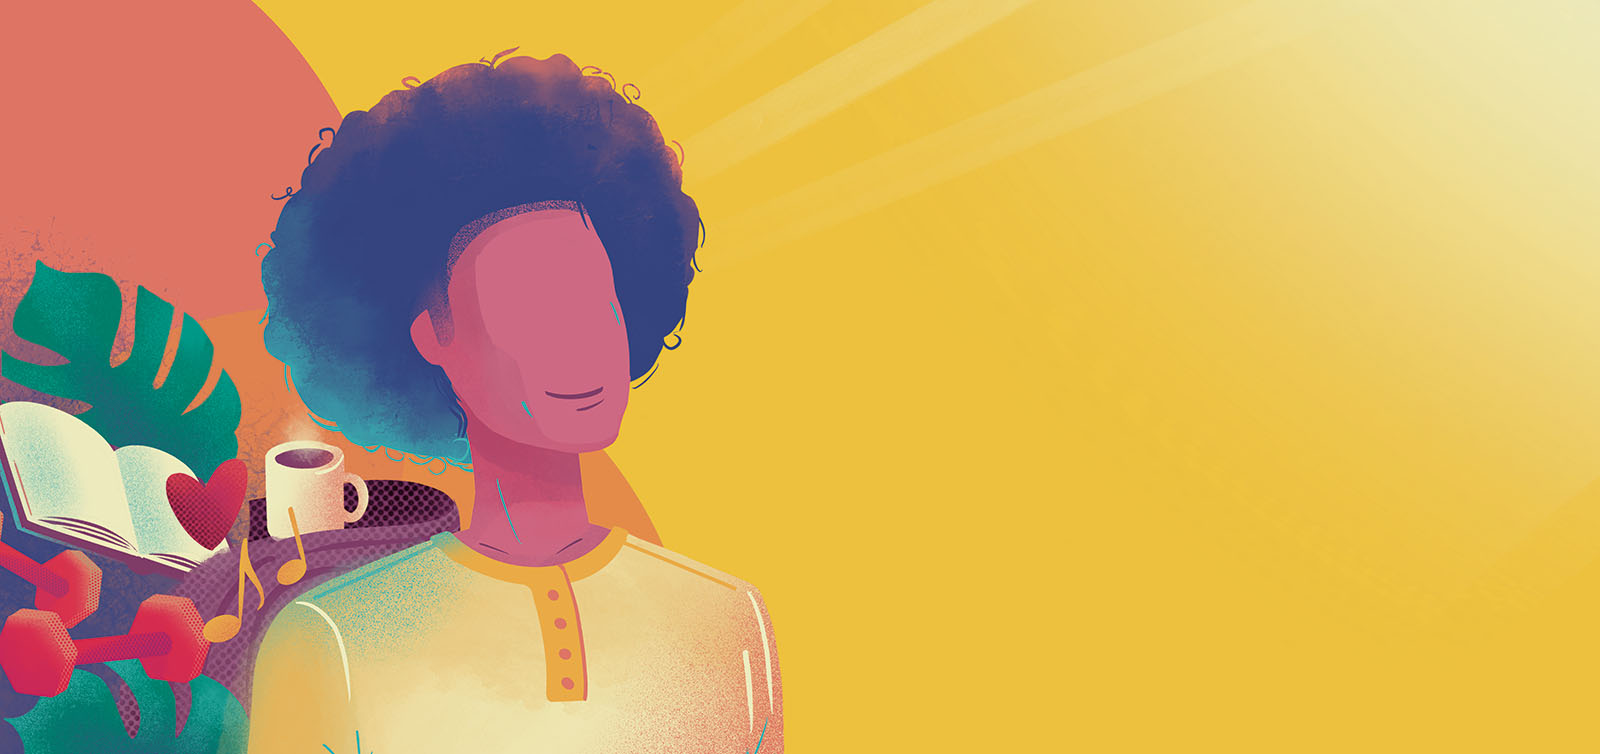 Textured illustration of a person with an afro, with weights, a mug, plants and a blanket behind them,].